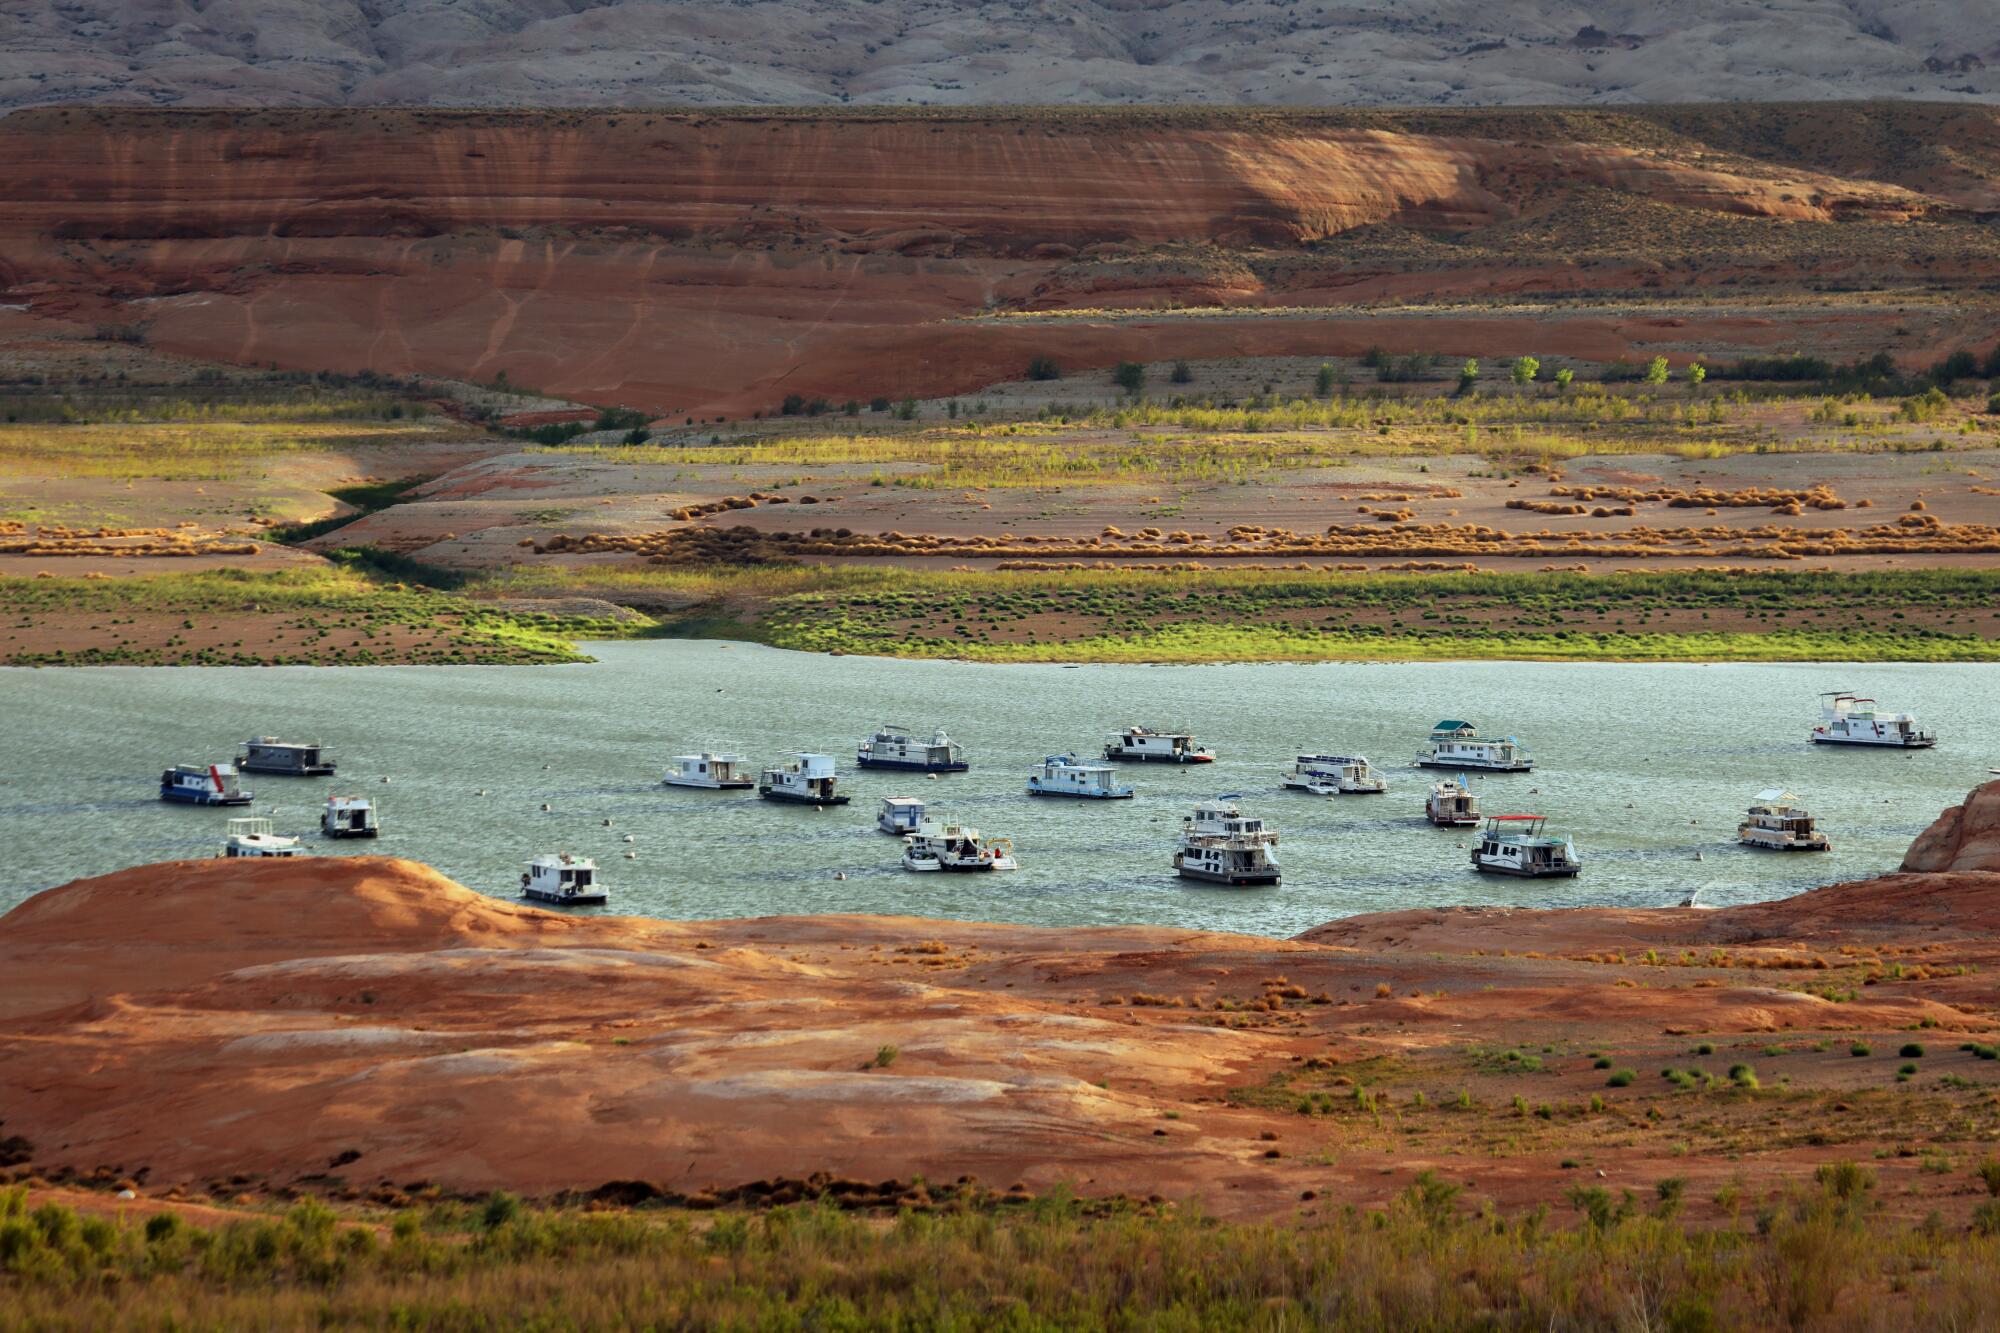 Houseboats seen from a distance dotting a blue-gray lake surrounded by red terrain streaked with green growth